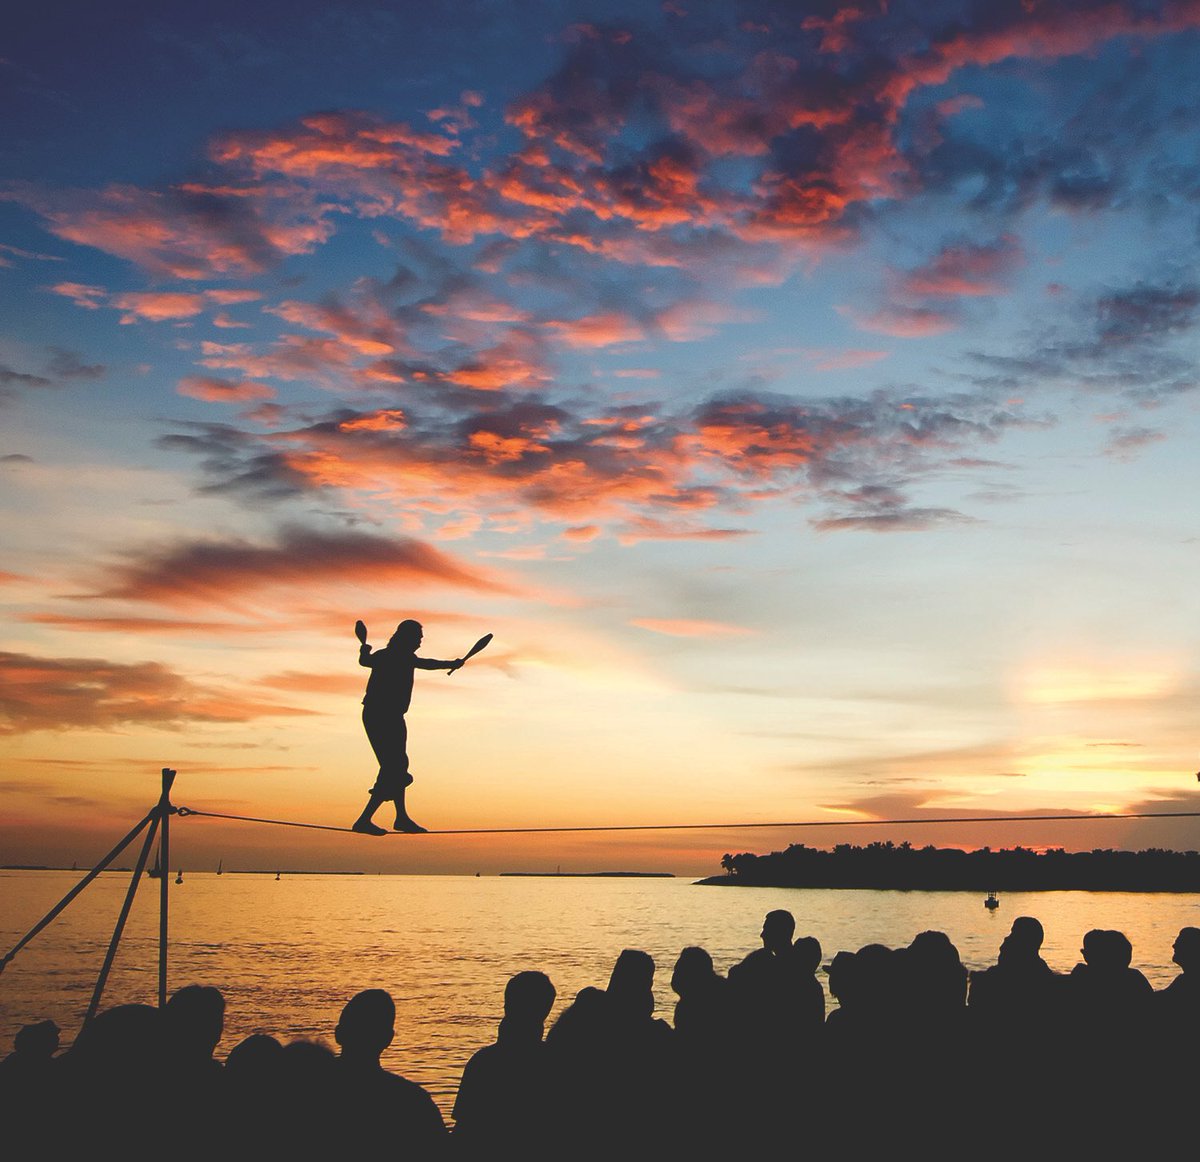 Sunset Celebration is a nightly event at Mallory Square, overlooking Key We...